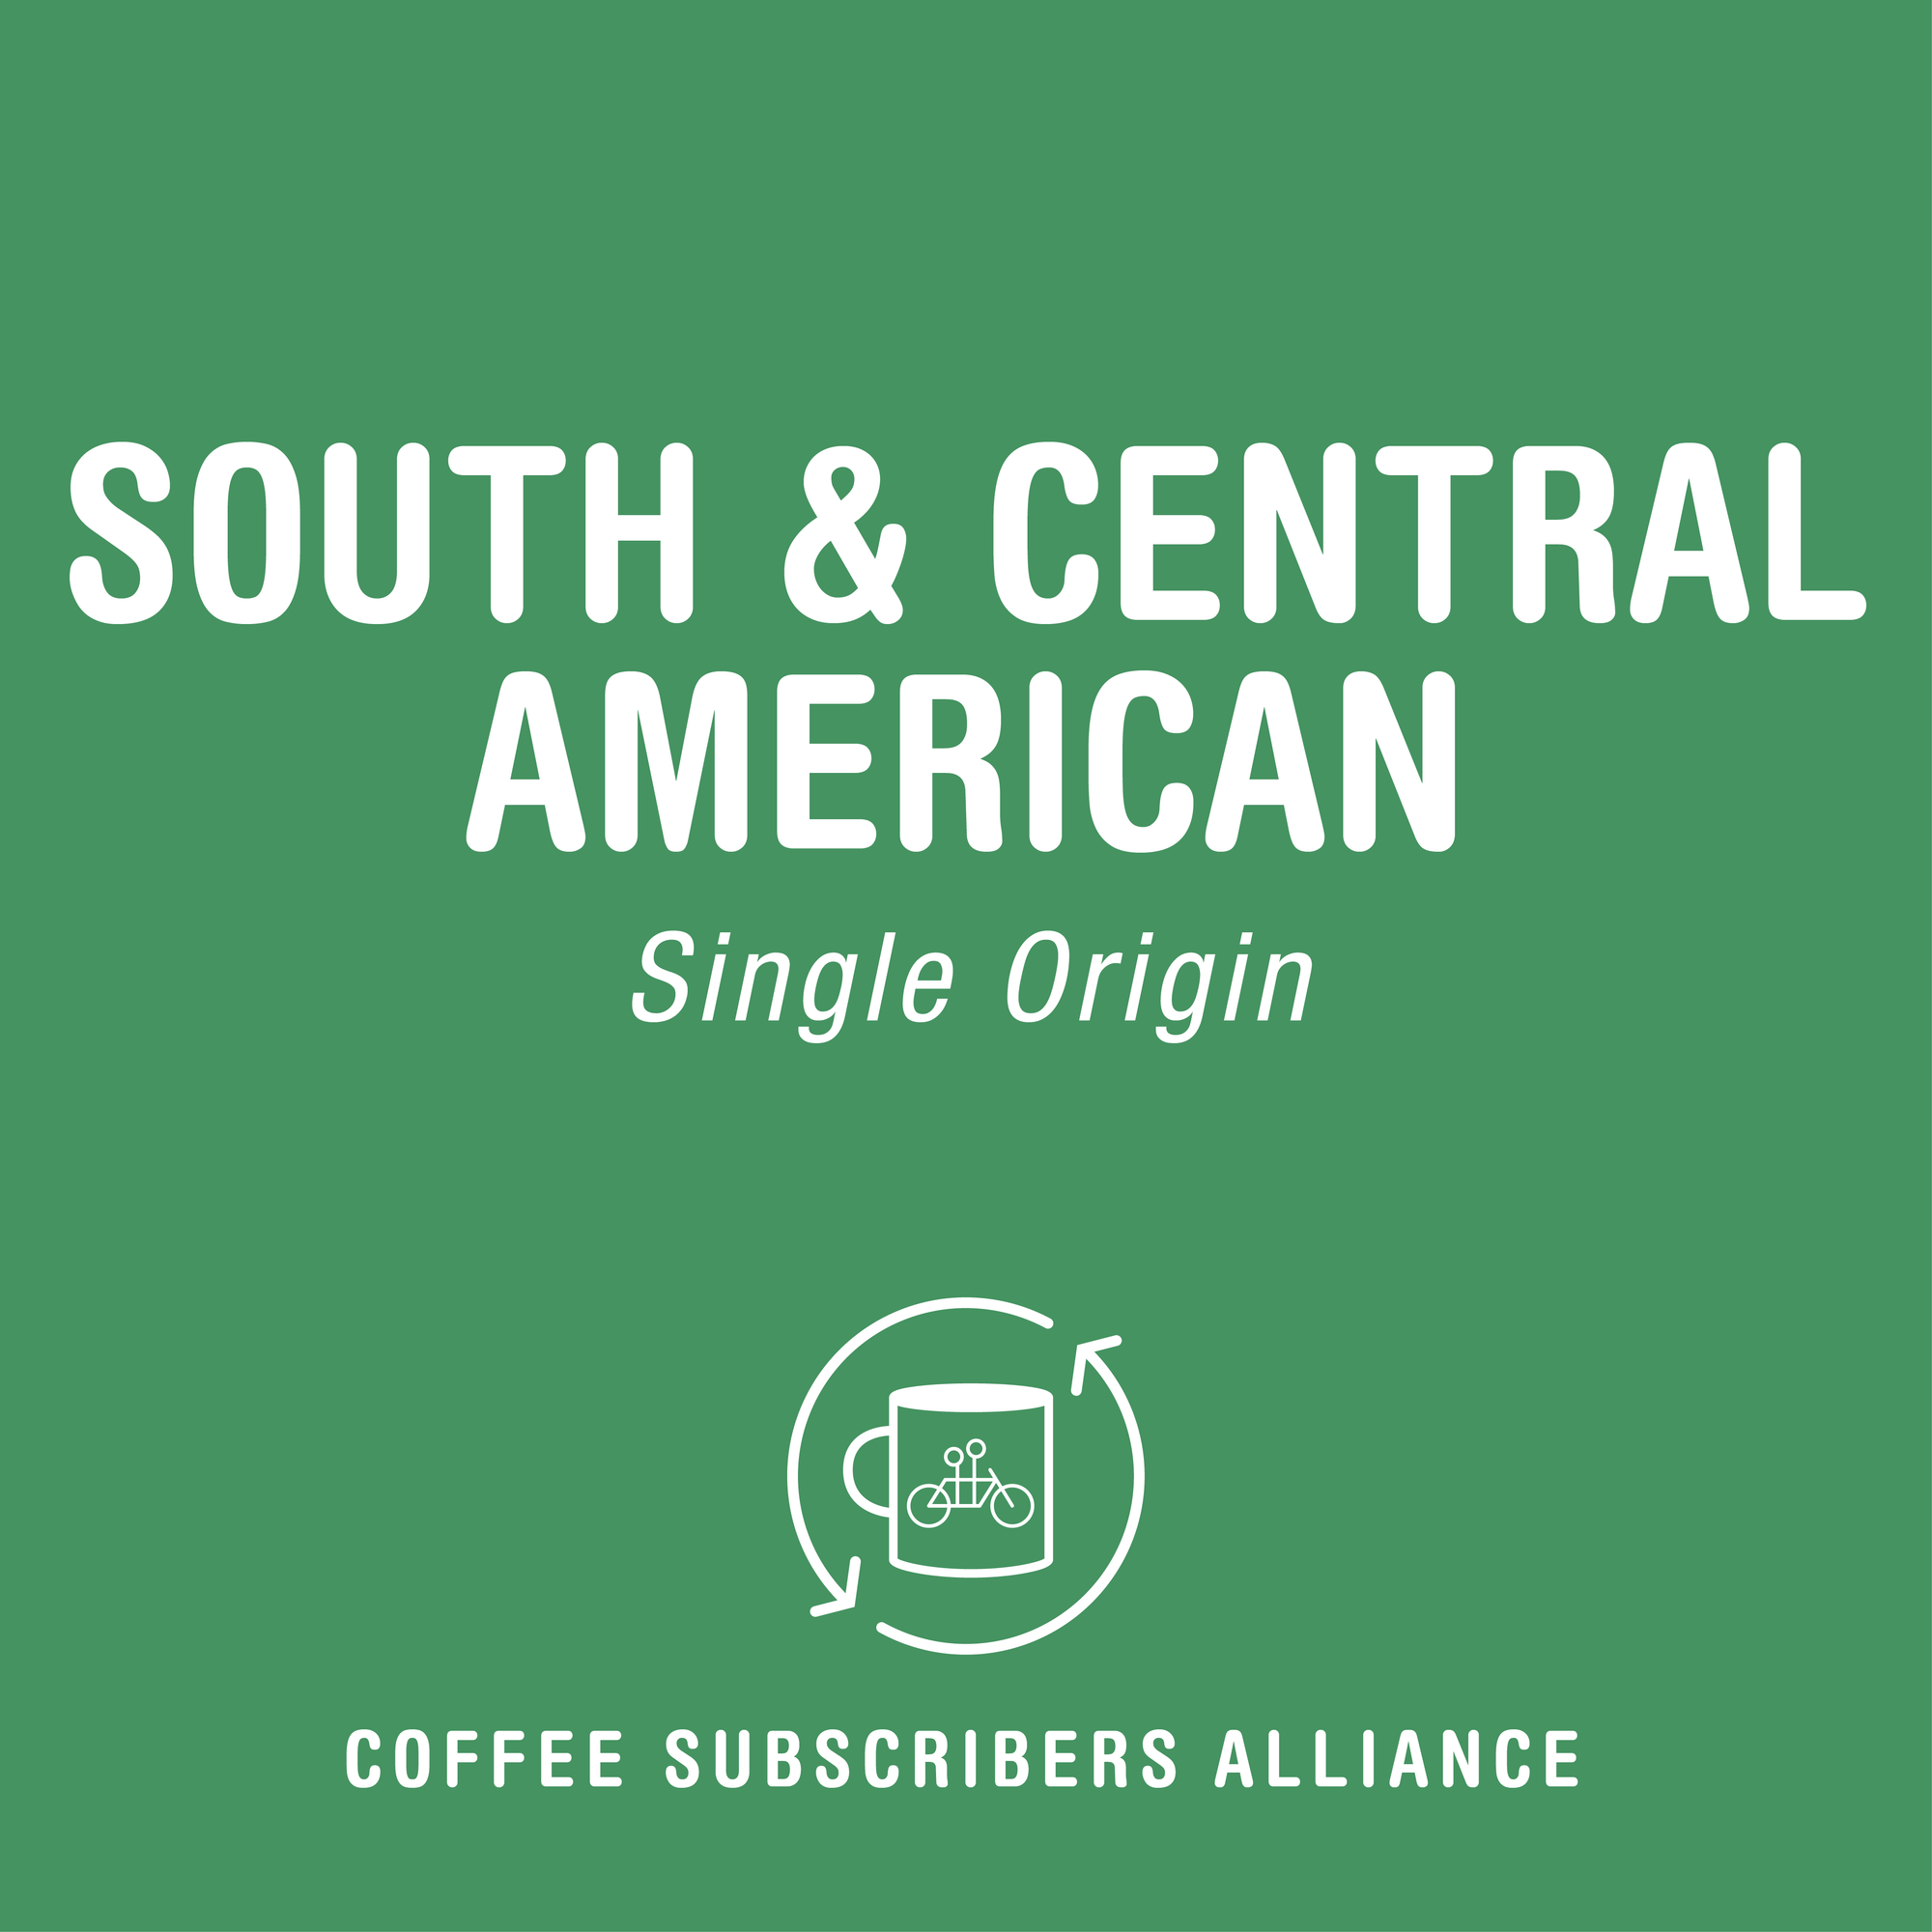 Graphic image with a green background featuring white text that reads "Tandem Coffee Roasters South & Central American Subscription Gift - 4 Weeks x 6" and a logo of coffee subscribers alliance with a coffee cup and bicycle motif.